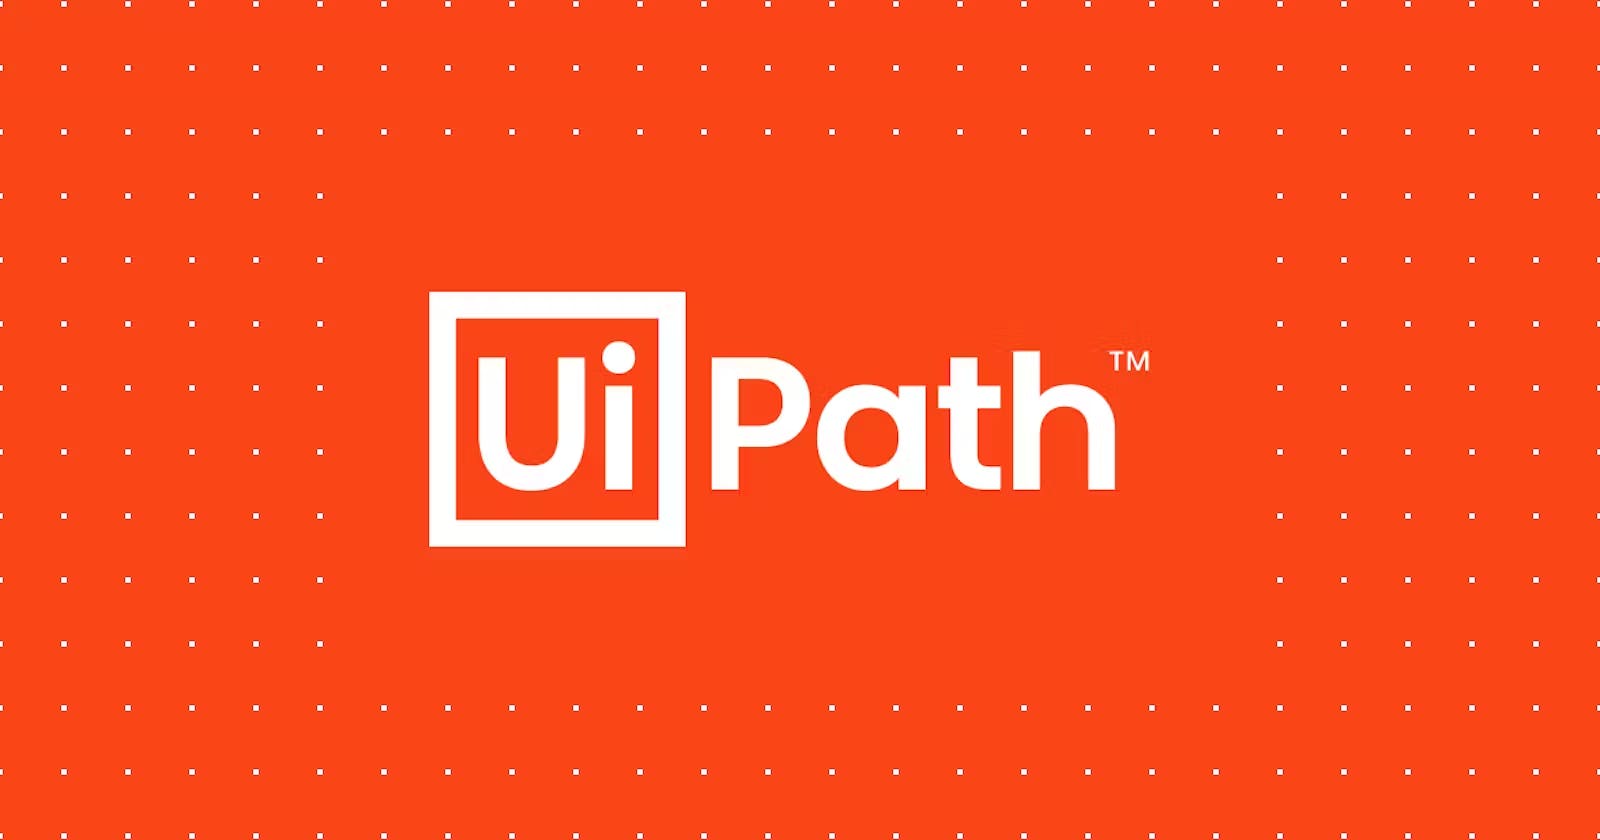 Types of Workflows in UiPath